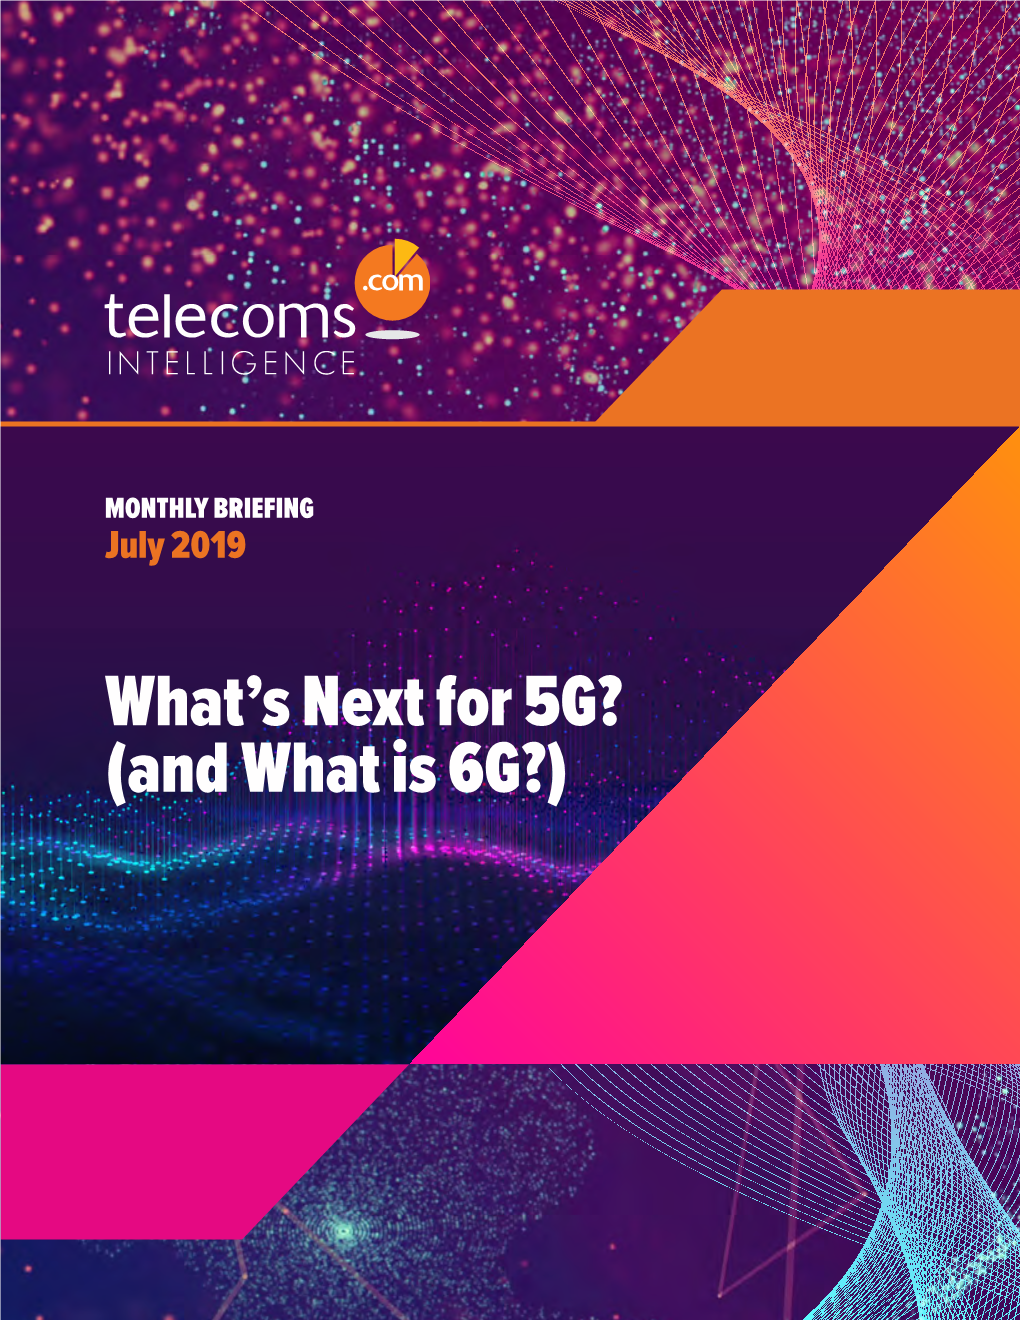 What's Next for 5G? (And What Is 6G?)